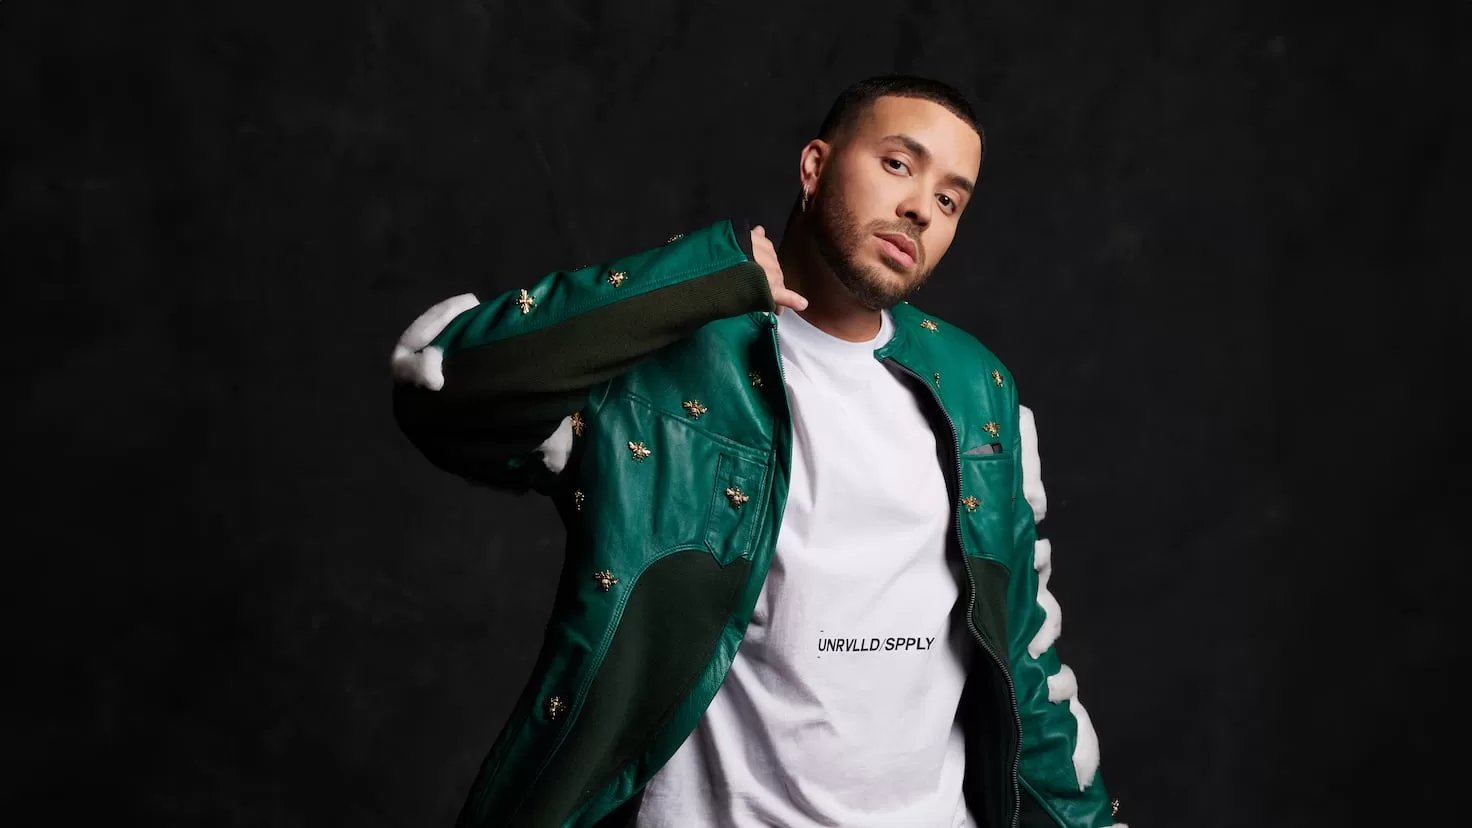 Prince Royce: I would like to do a collaboration with Enrique Iglesias or Juan Luis Guerra
